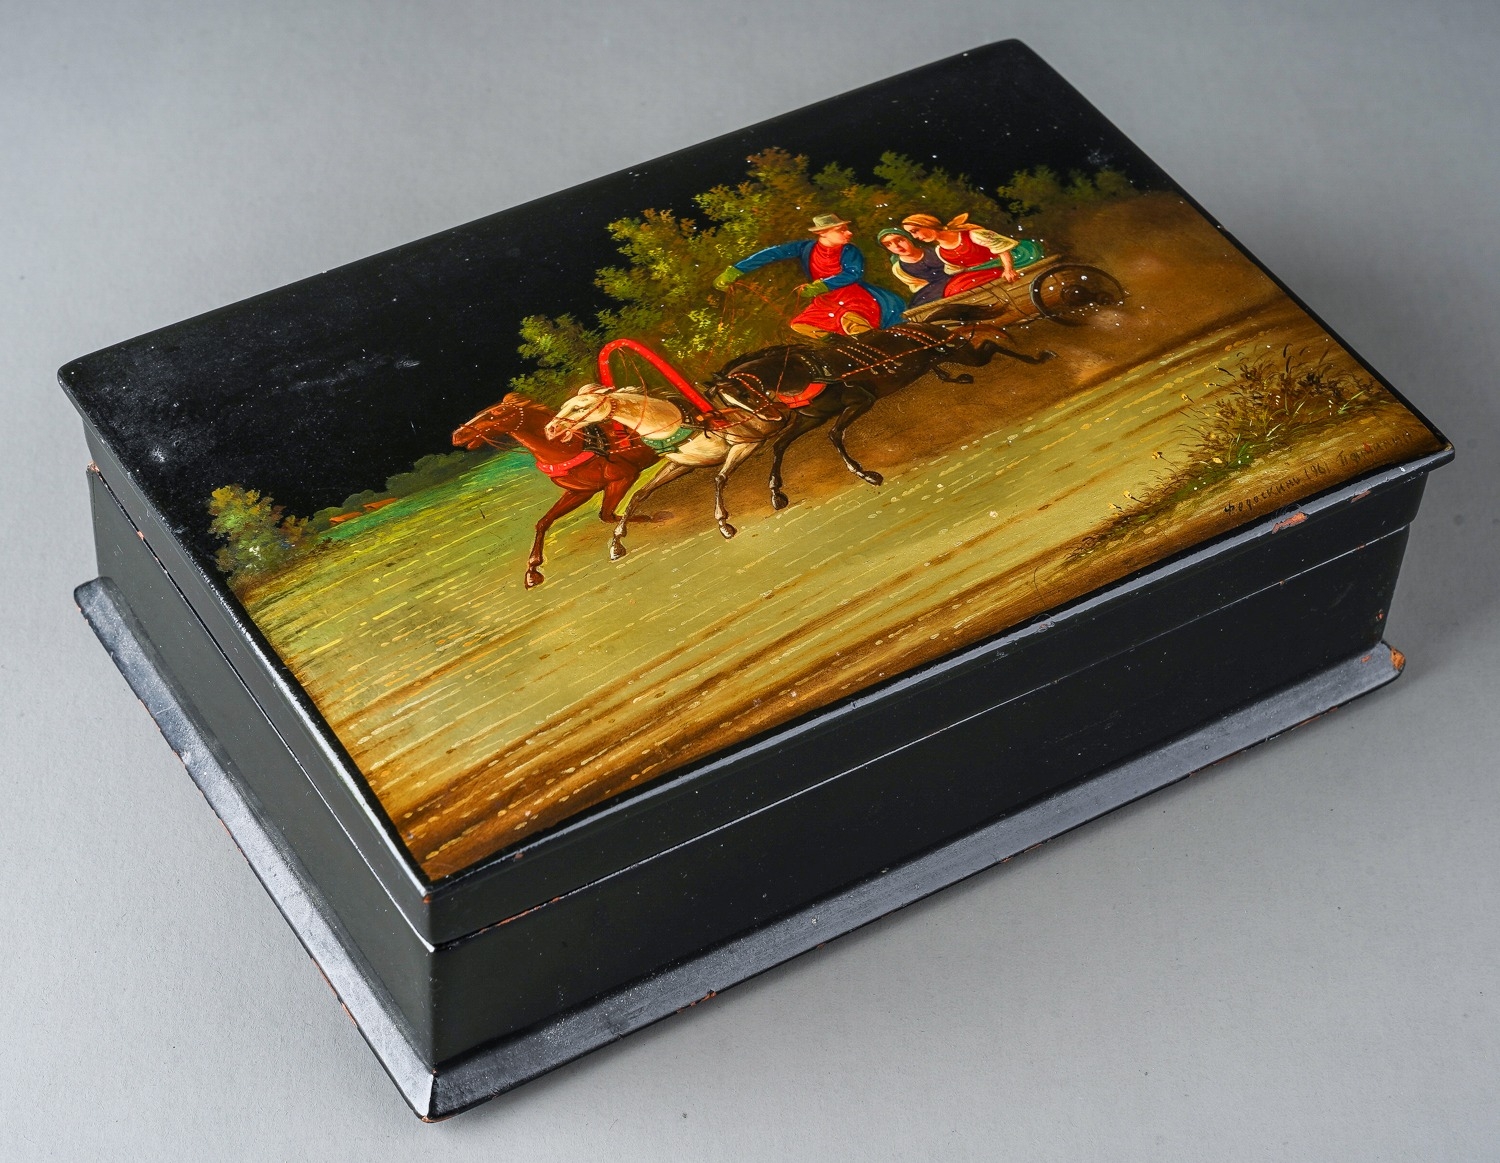 Soviet era hand painted lacquered Russian box, signed and dated lower right corner, dated 1961 .